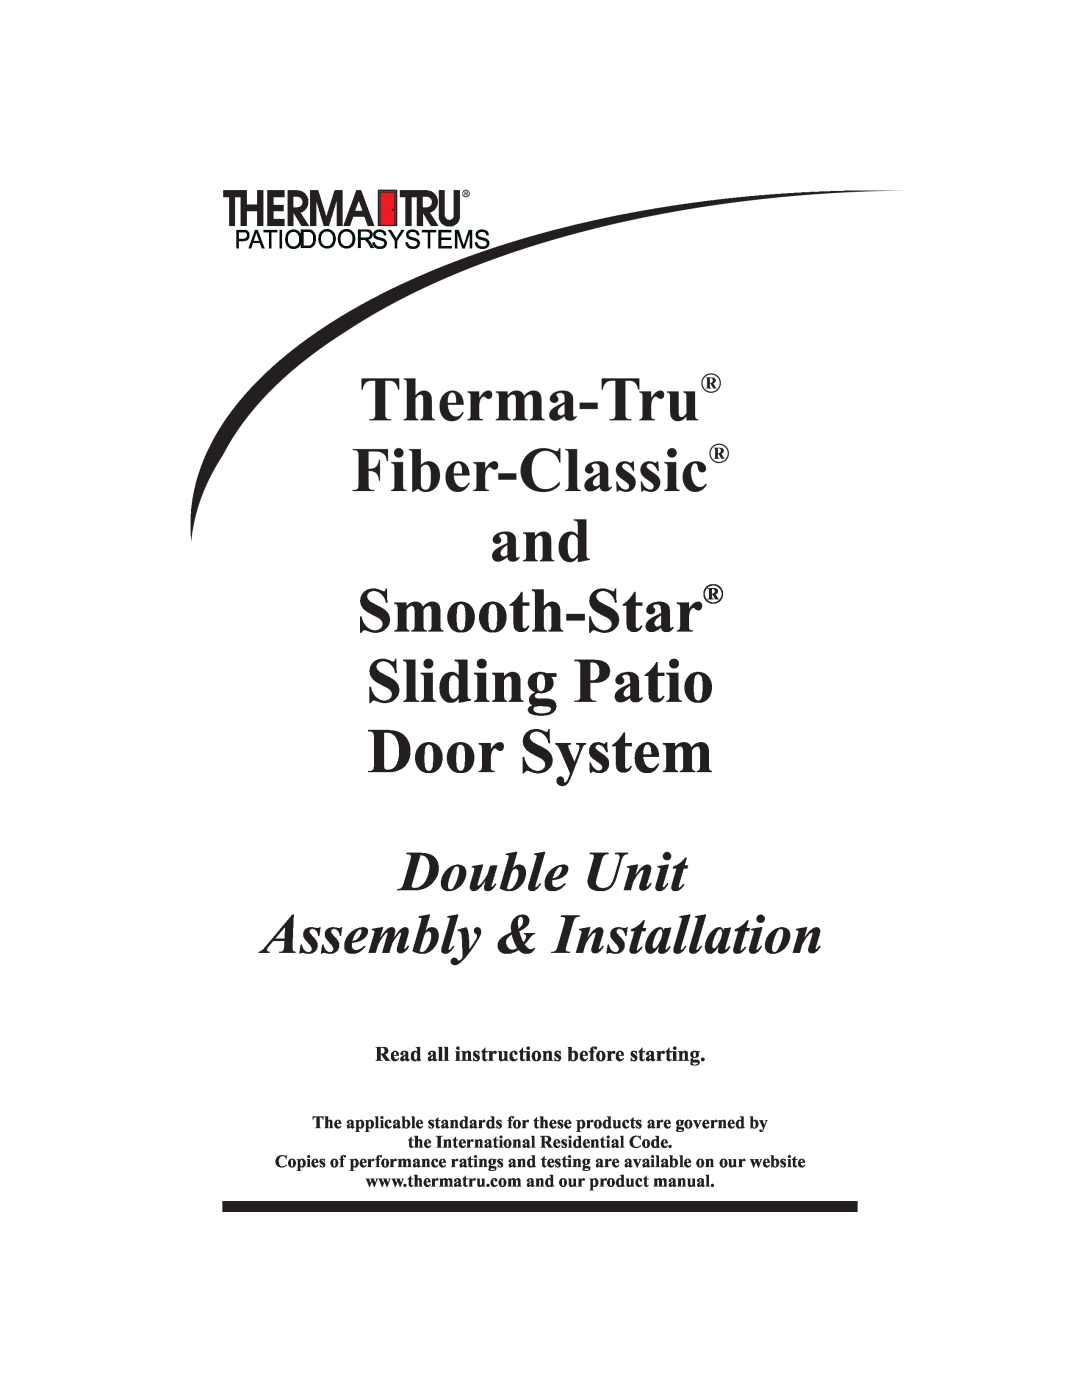 Therma-Tru manual the International Residential Code, Therma-Tru Fiber-Classic and Smooth-Star, Patiodoorsystems 